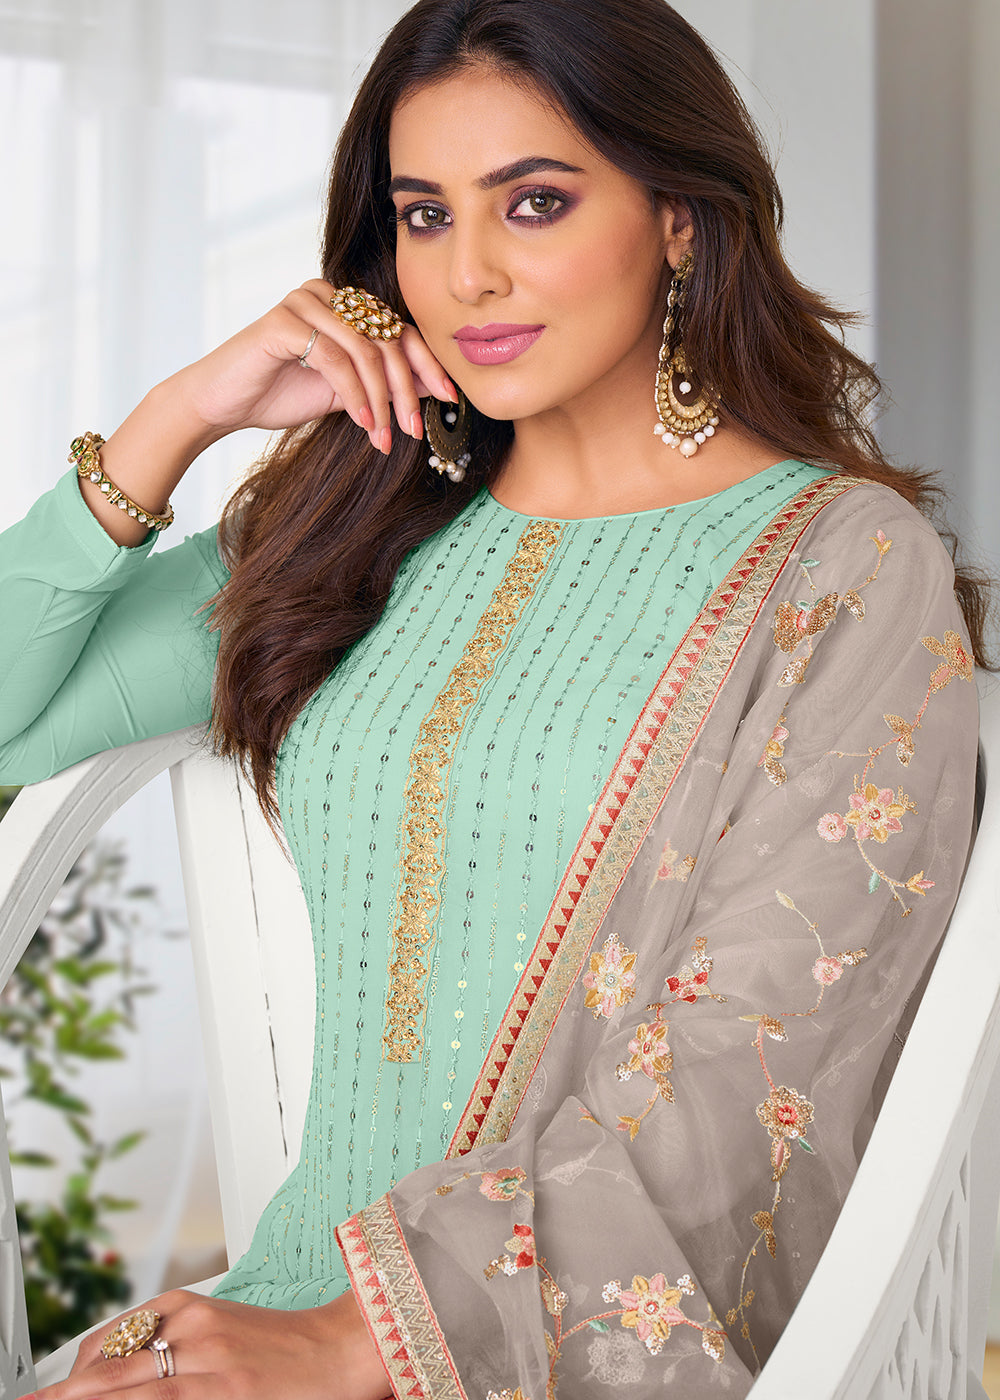 Buy Now Pretty Mint Green Beautifully Embroidered Trendy Salwar Kameez Online in USA, UK, Canada, Germany, Australia & Worldwide at Empress Clothing.